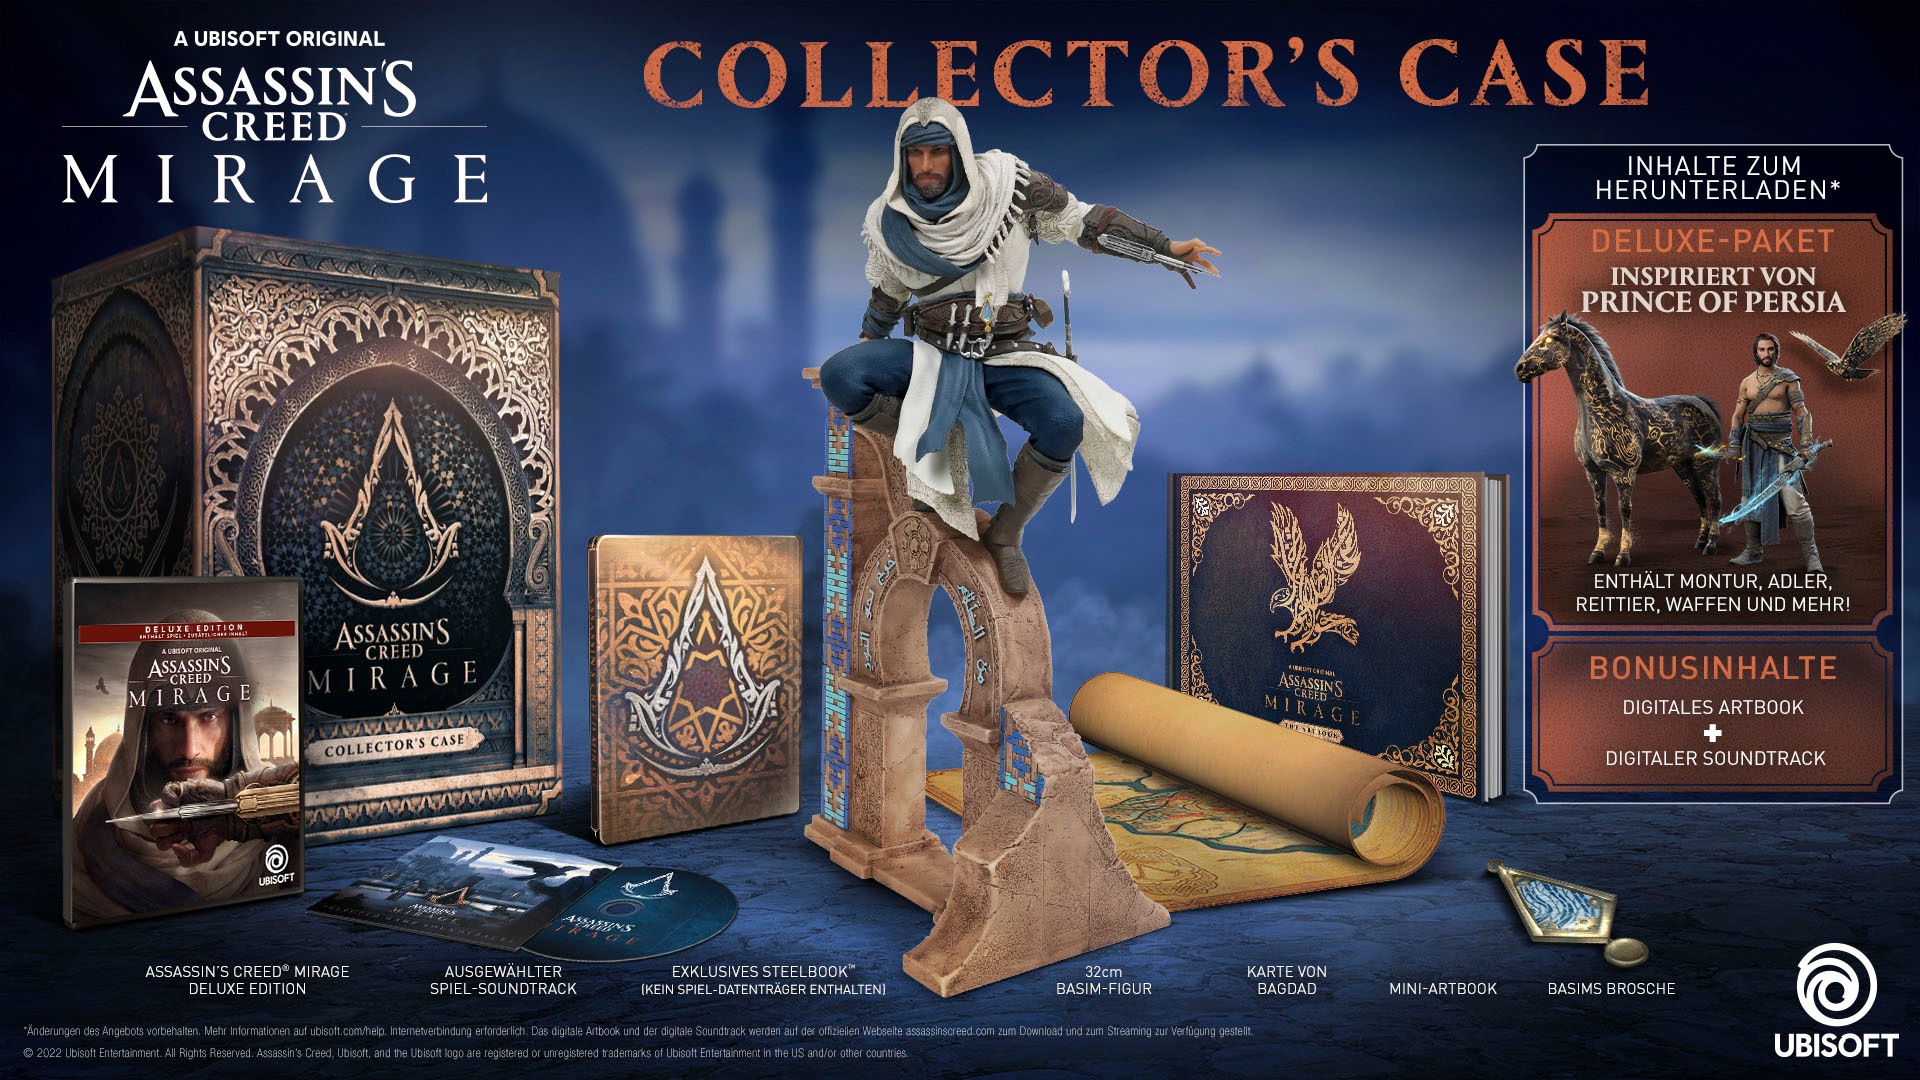 UBISOFT Spielesoftware »Assassin’s Creed Mirage Collector’s Edition –«, PlayStation 4, (kostenloses Upgrade auf PS5)